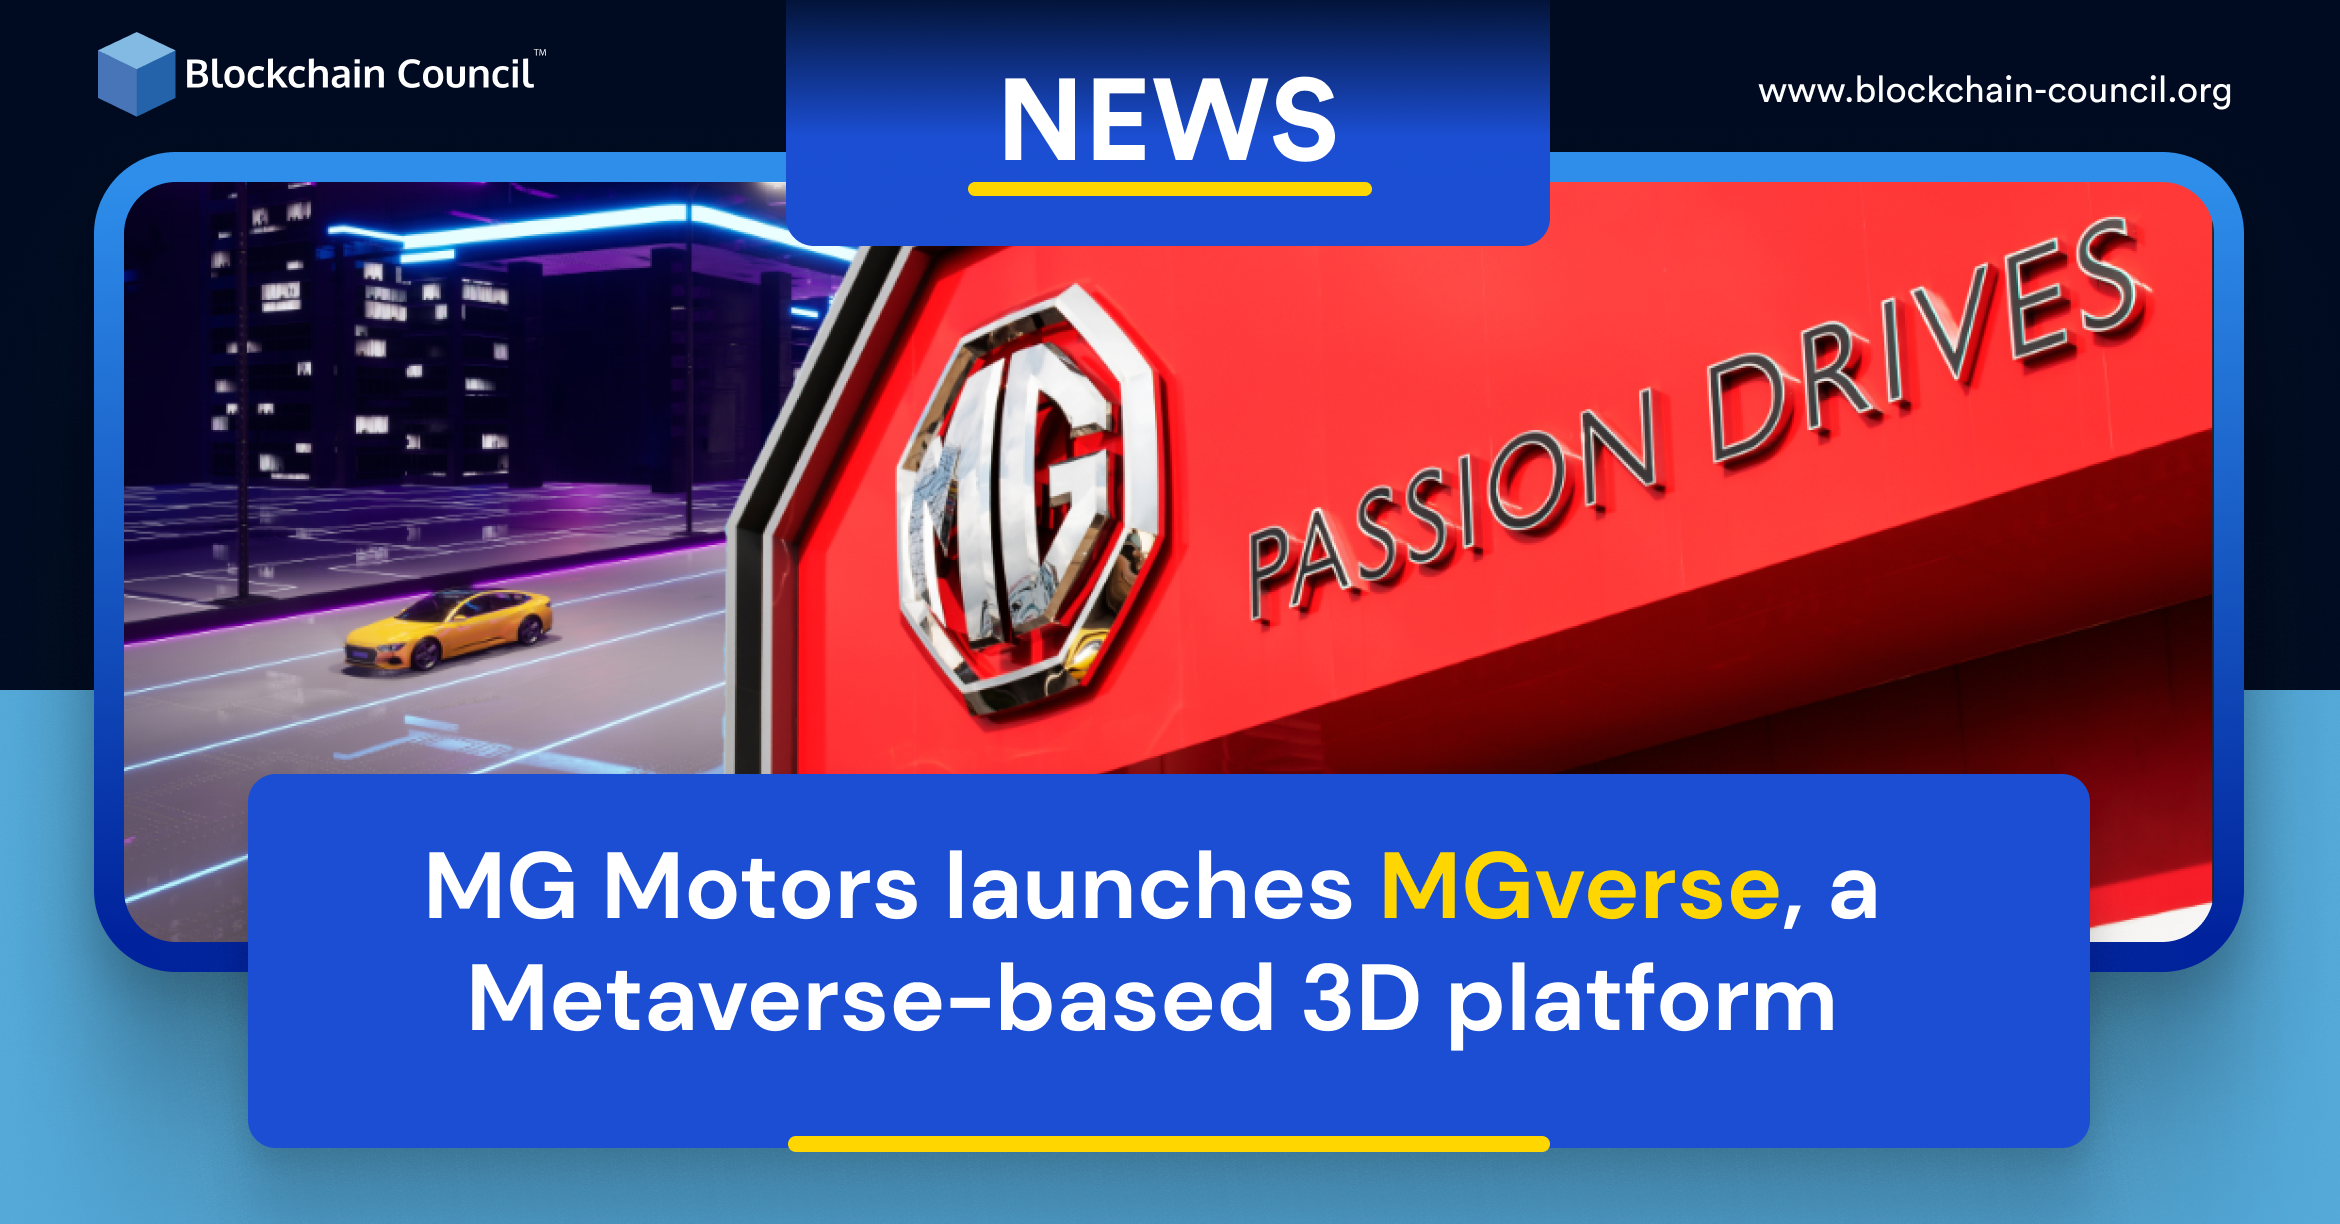 MG Motors launches MGverse, a Metaverse-based 3D platform